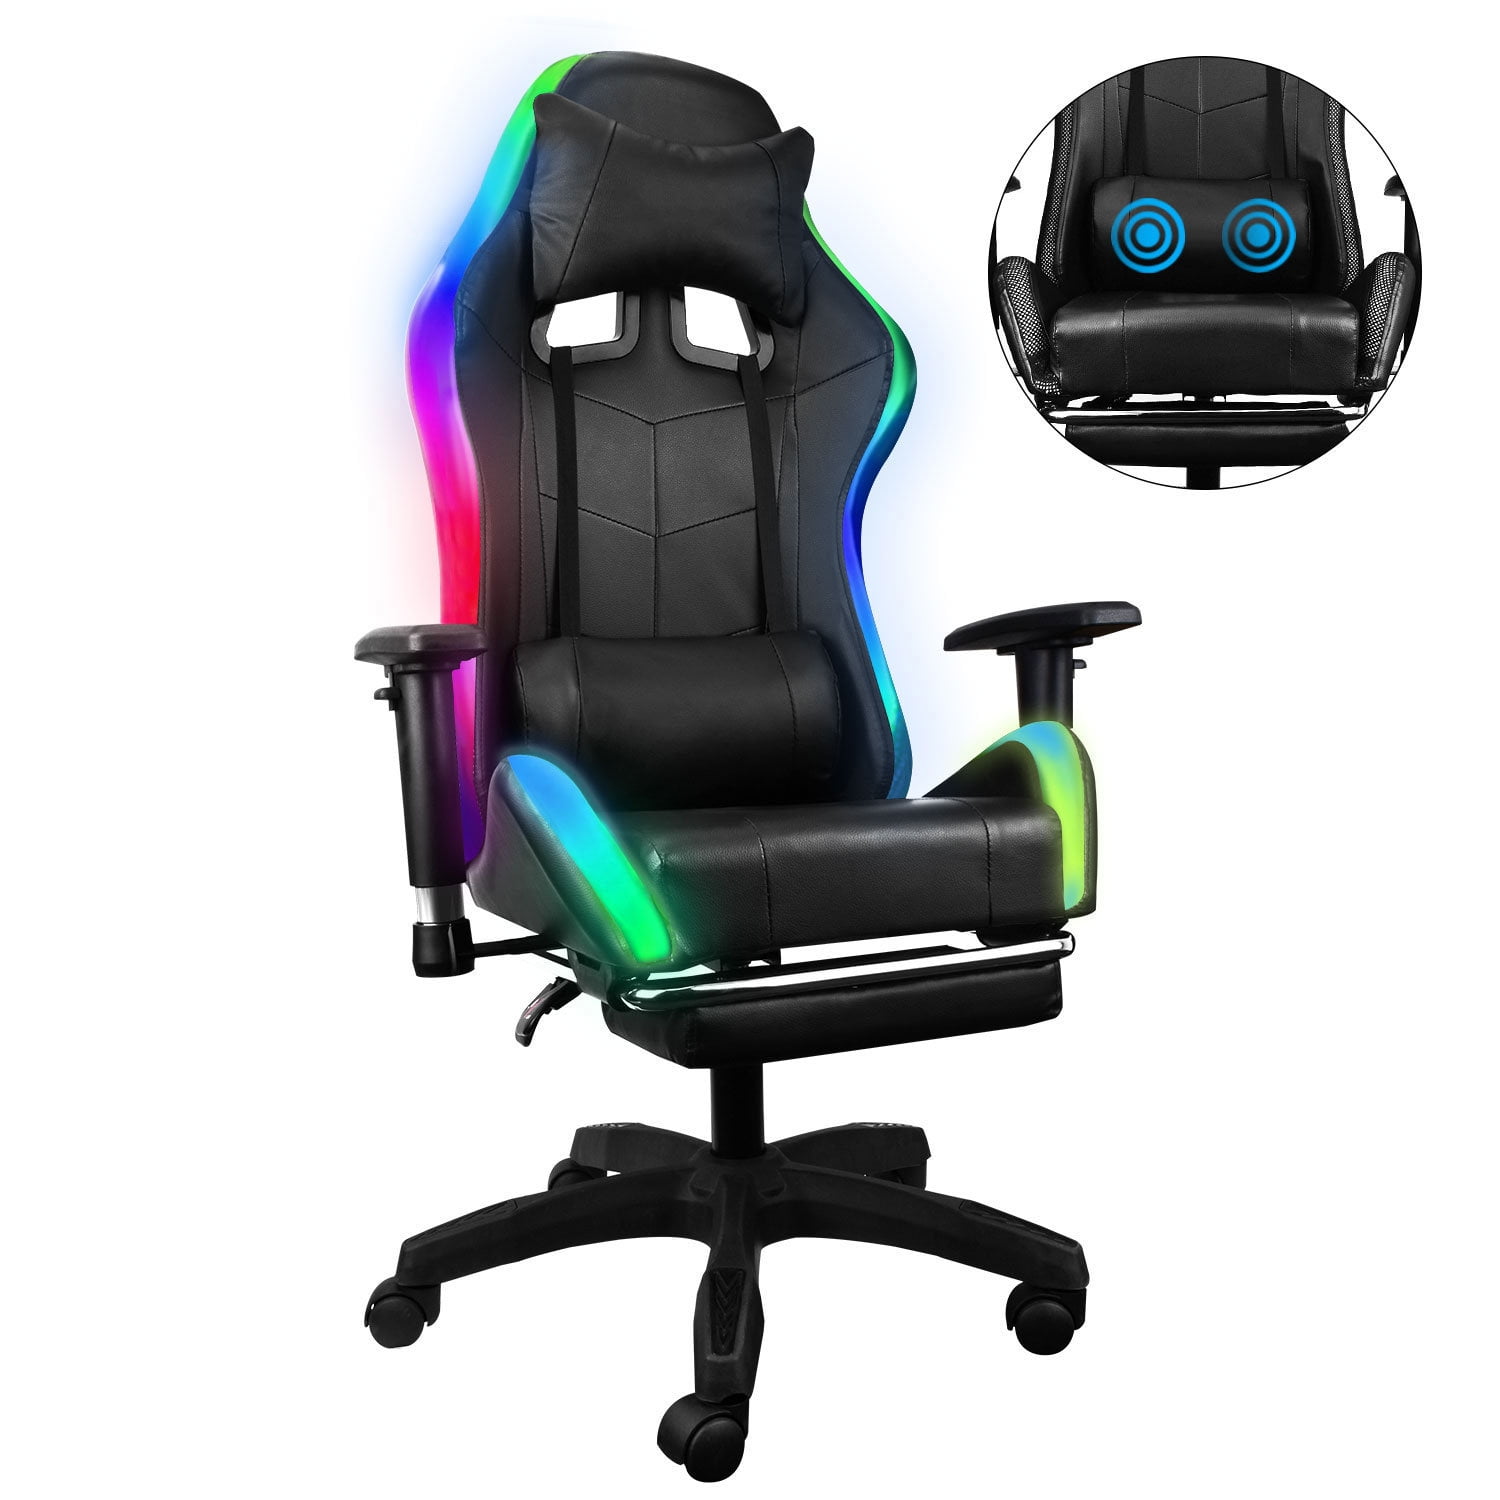 Gaming Chair With Rgb Led Lights Ergonomic Racing Style Backrest And Seat Height Adjustable 3d Armrests Swivel Game Chairs With Headrest Massage Lumbar Support And Footrest Black Walmart Com Walmart Com